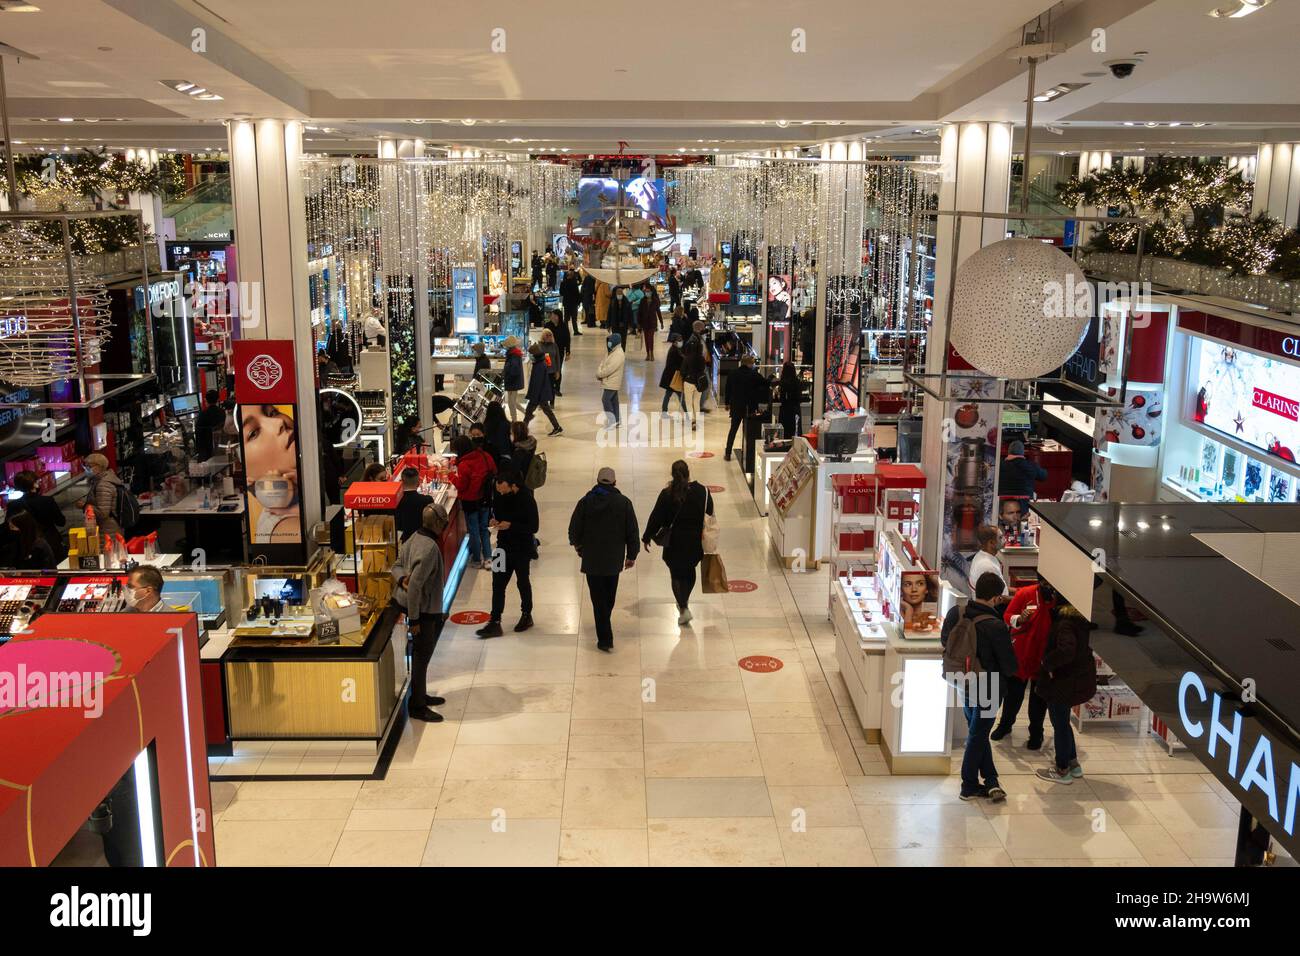 Main floor at Macy's flagship department store during the holiday season, New York City, USA  2021 Stock Photo